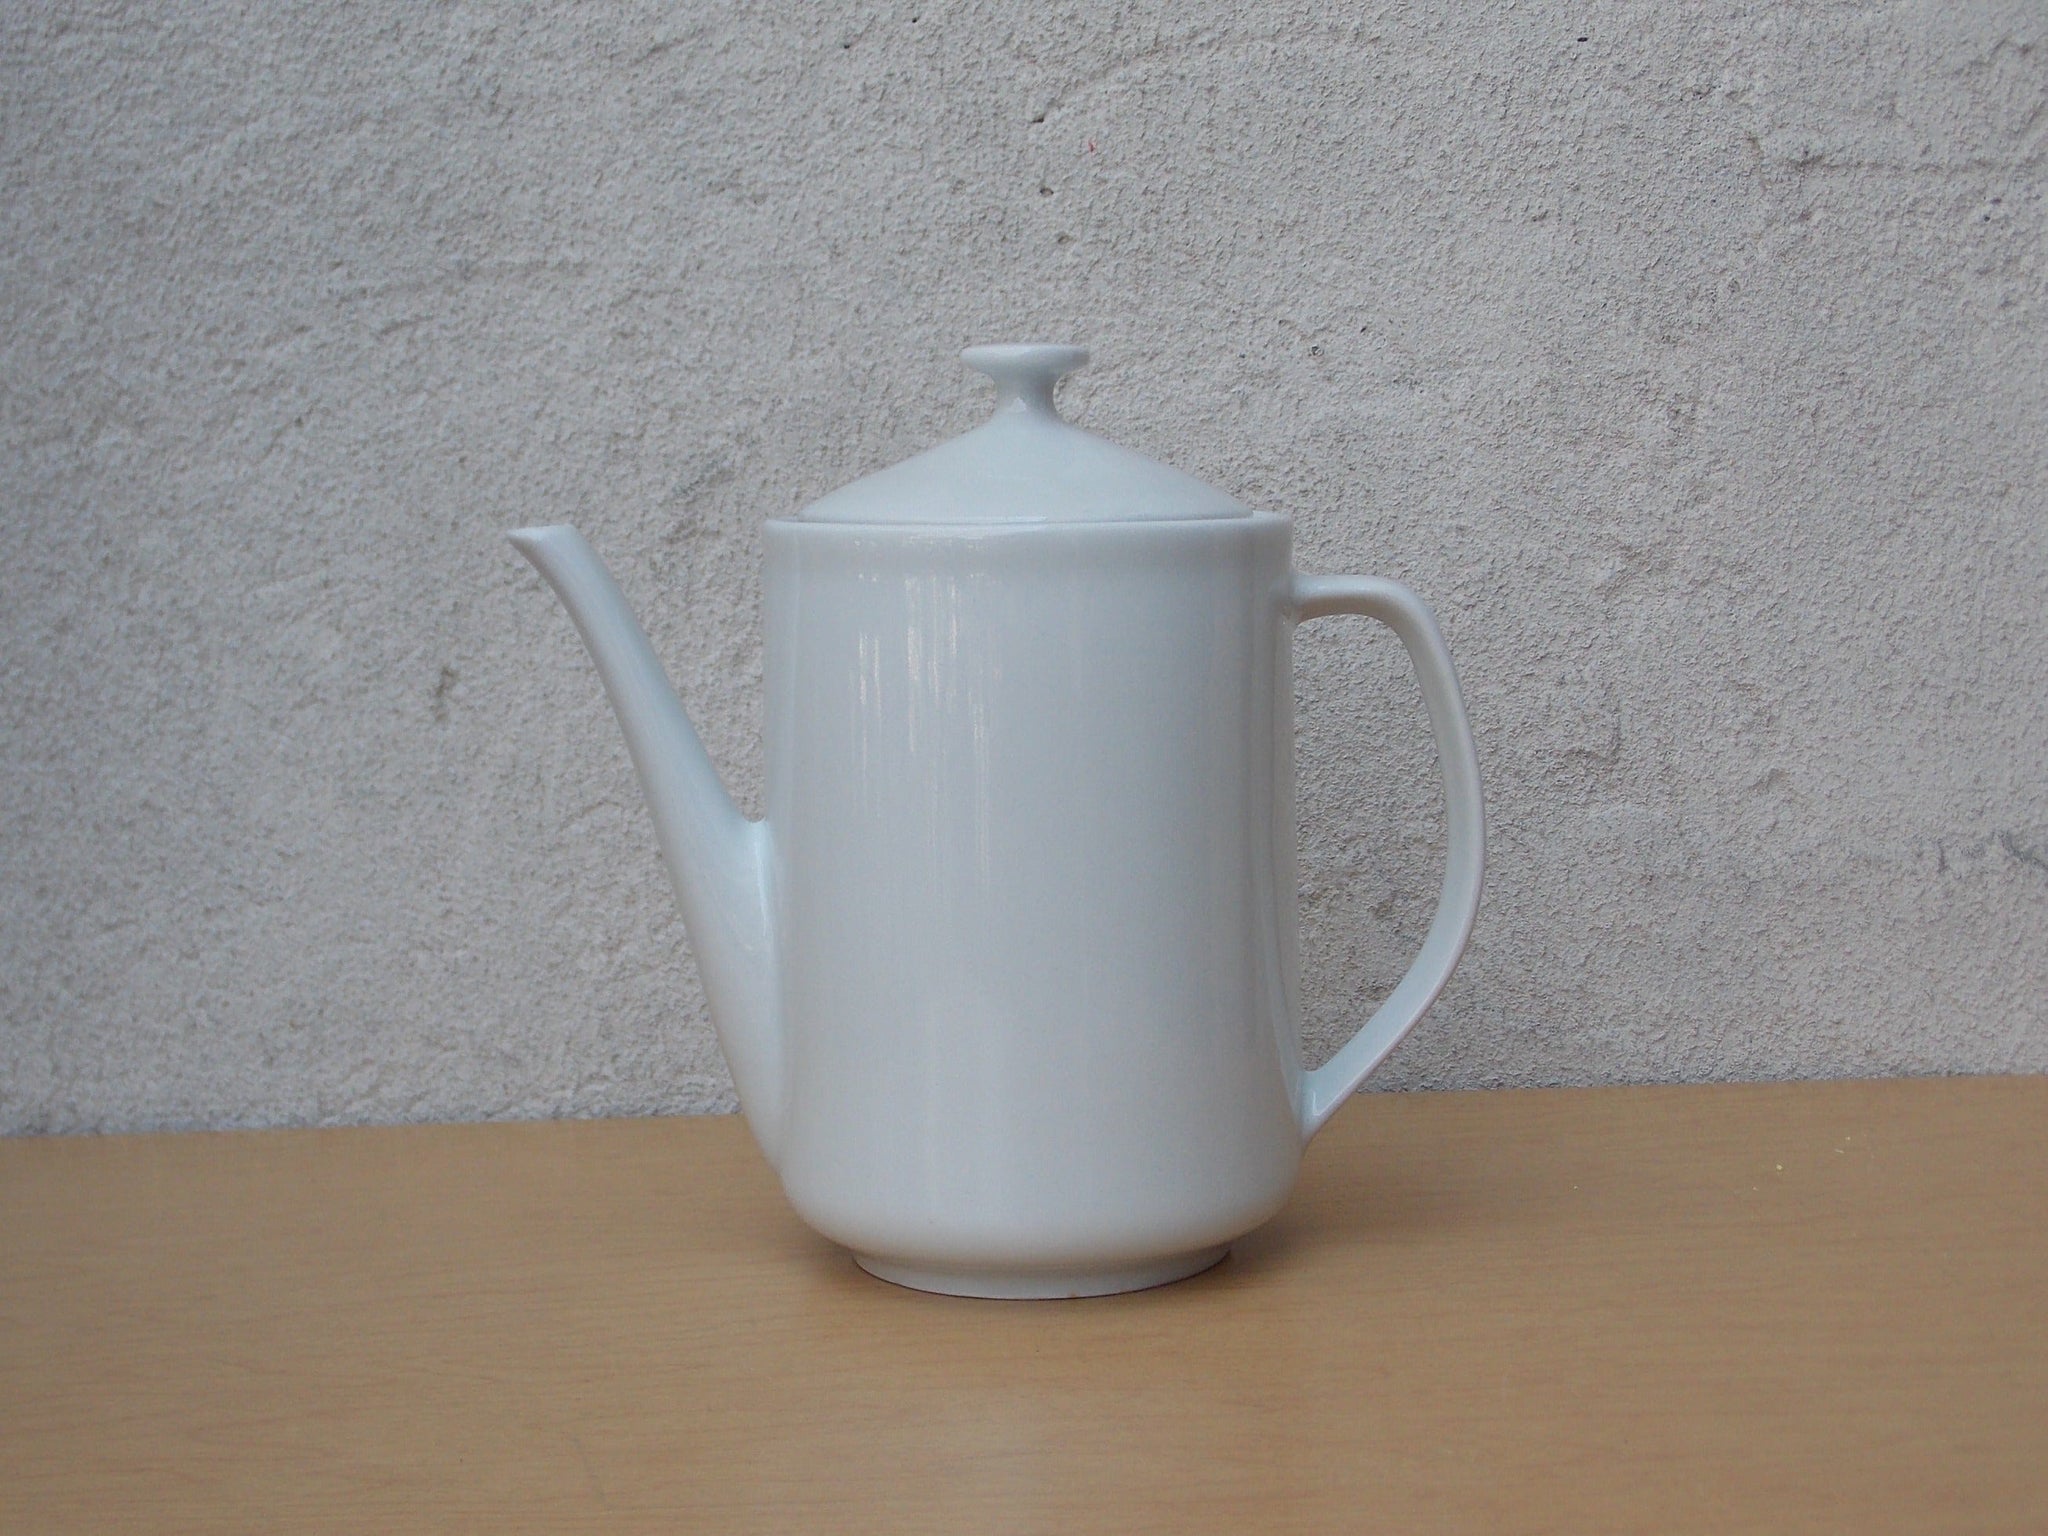 Simple White Tall Modern Ceramic Teapot or Coffee Pot, Made in